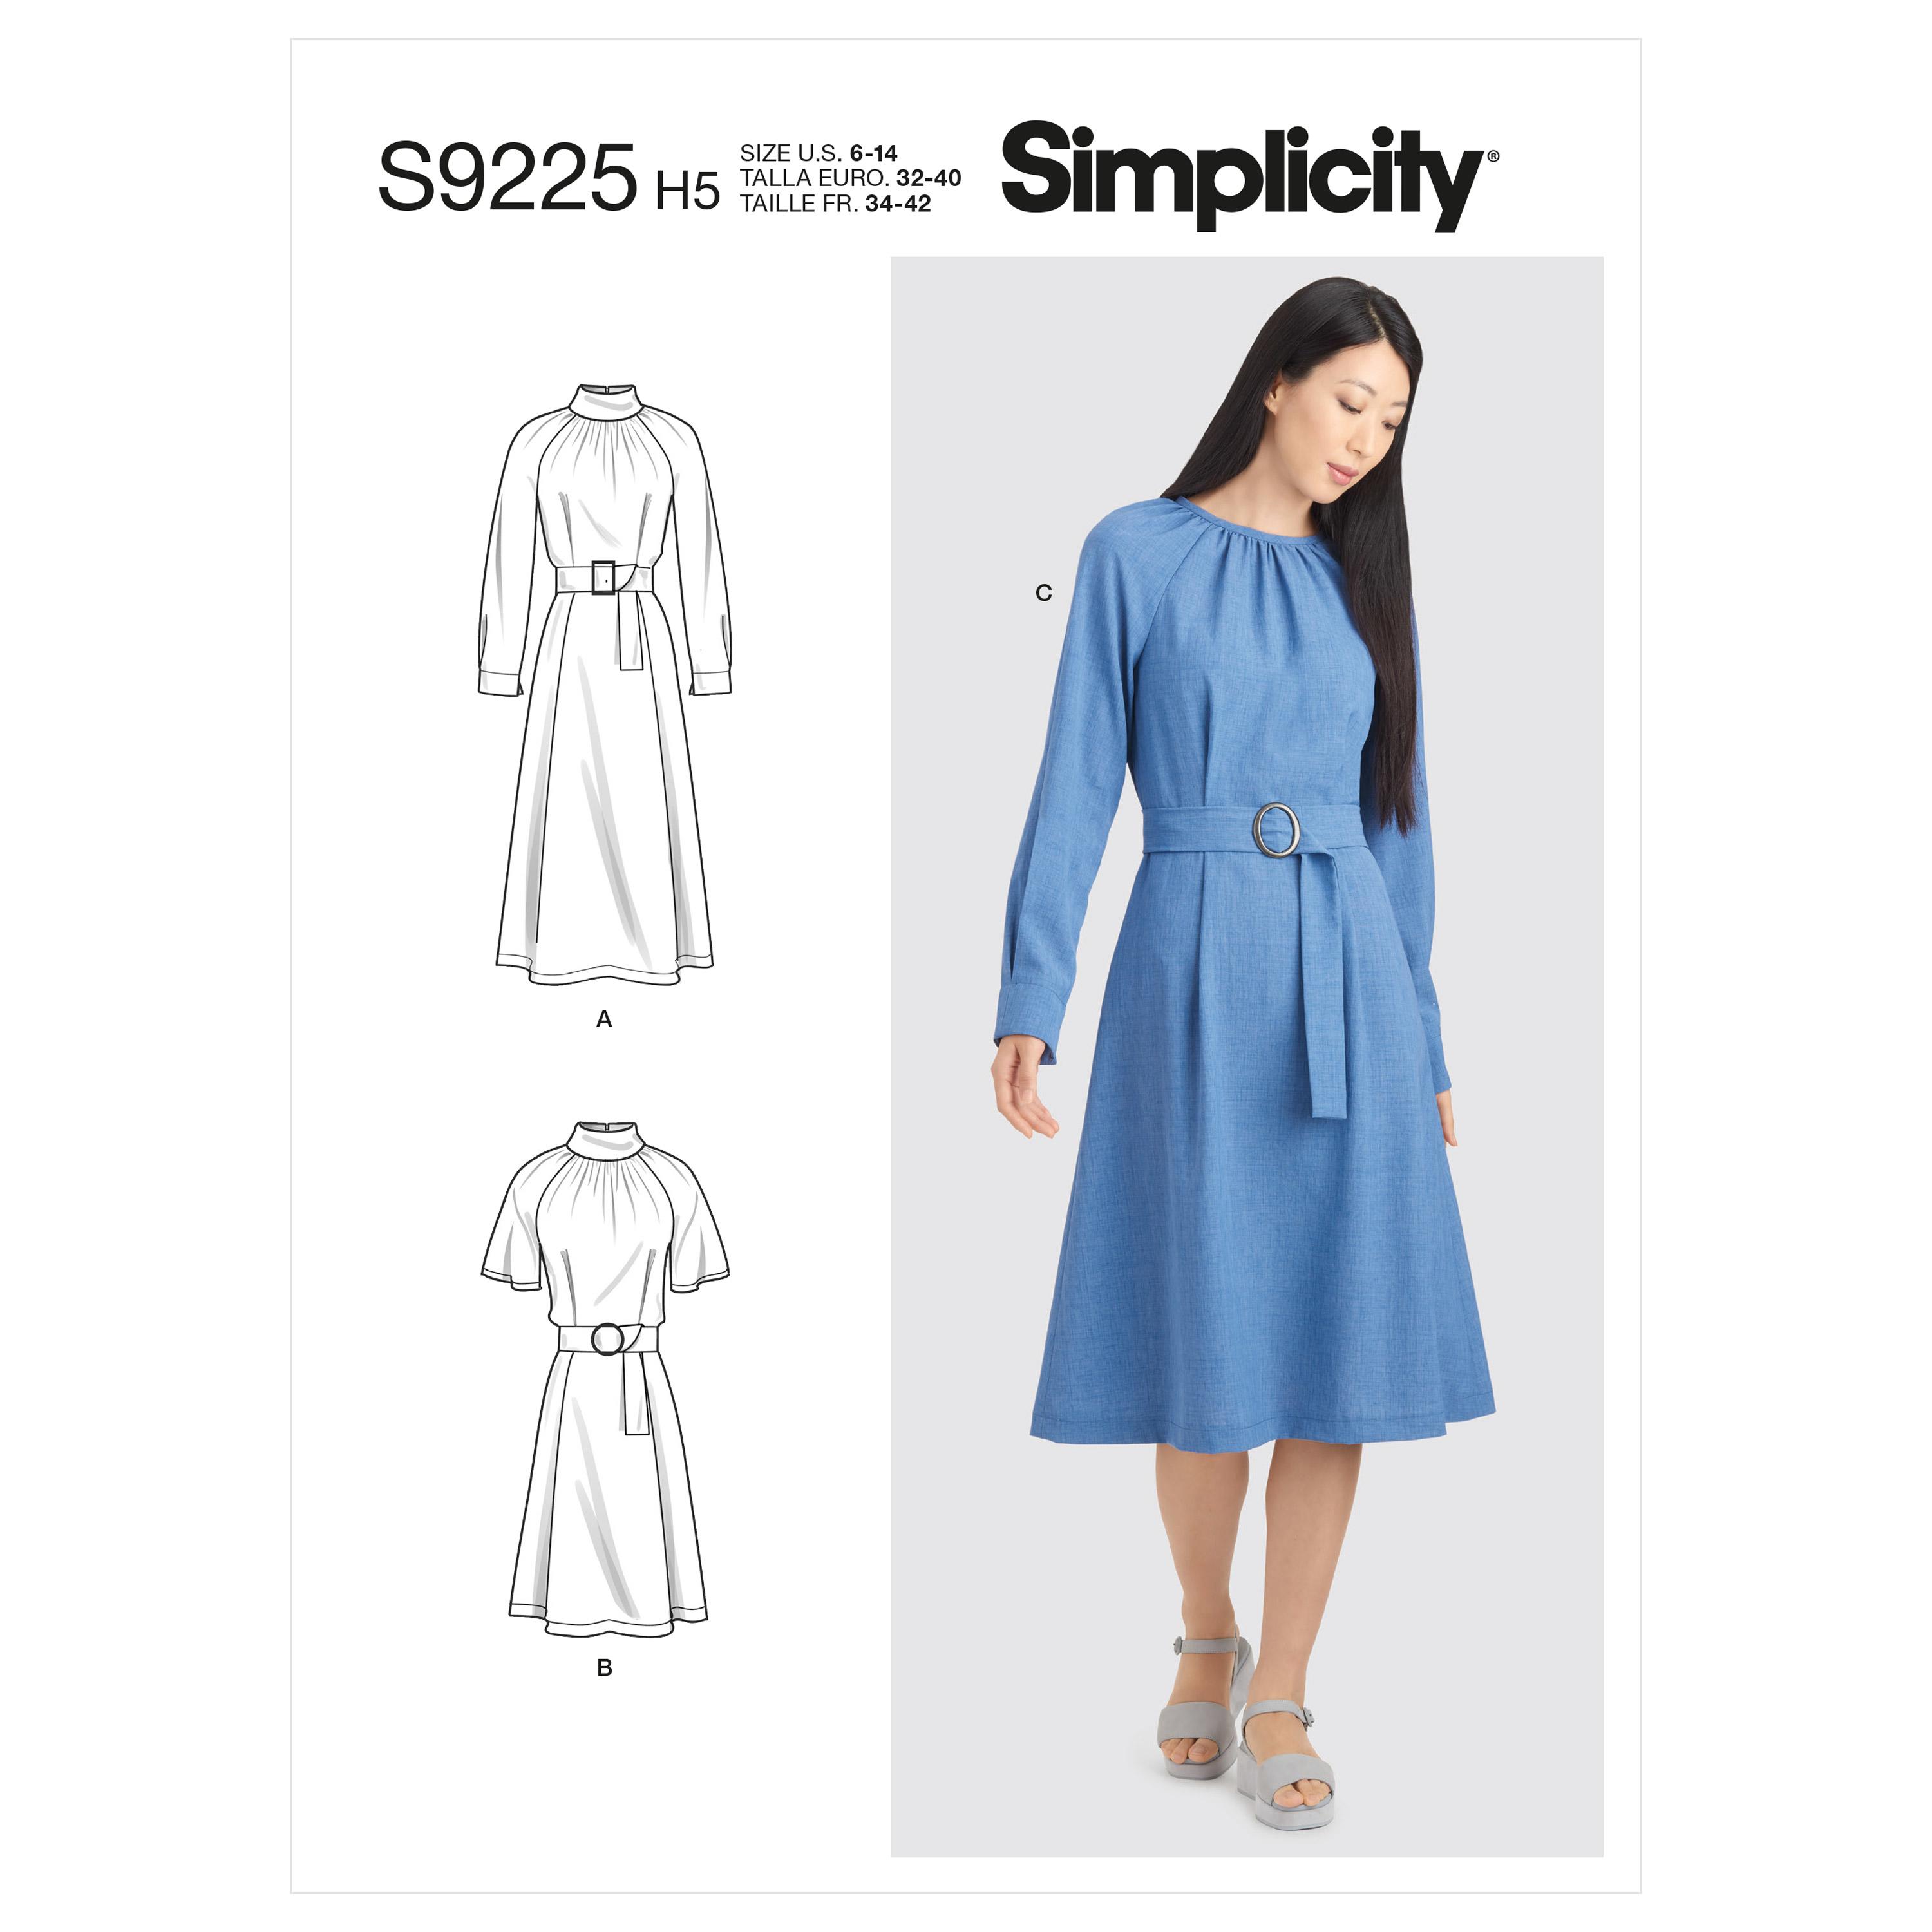 Simplicity Sewing Pattern S9225 Misses' Dresses